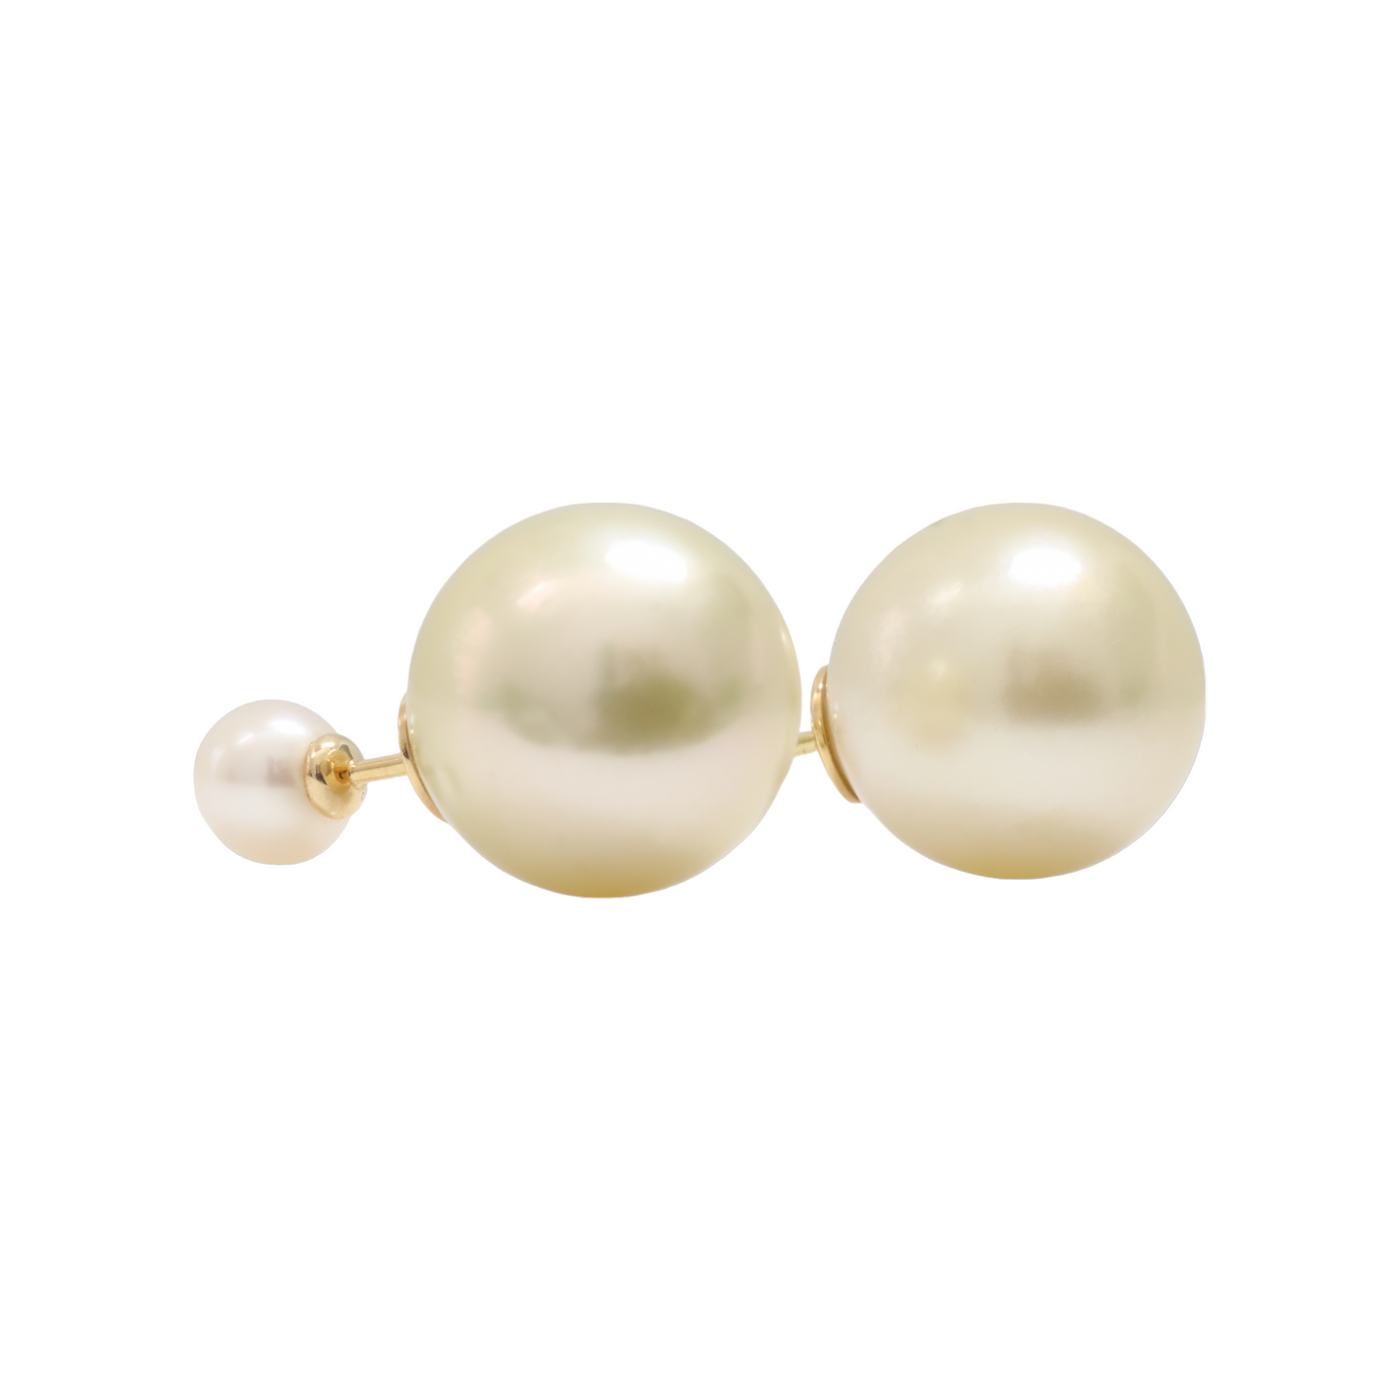 South Sea Pearls in 18ct YG